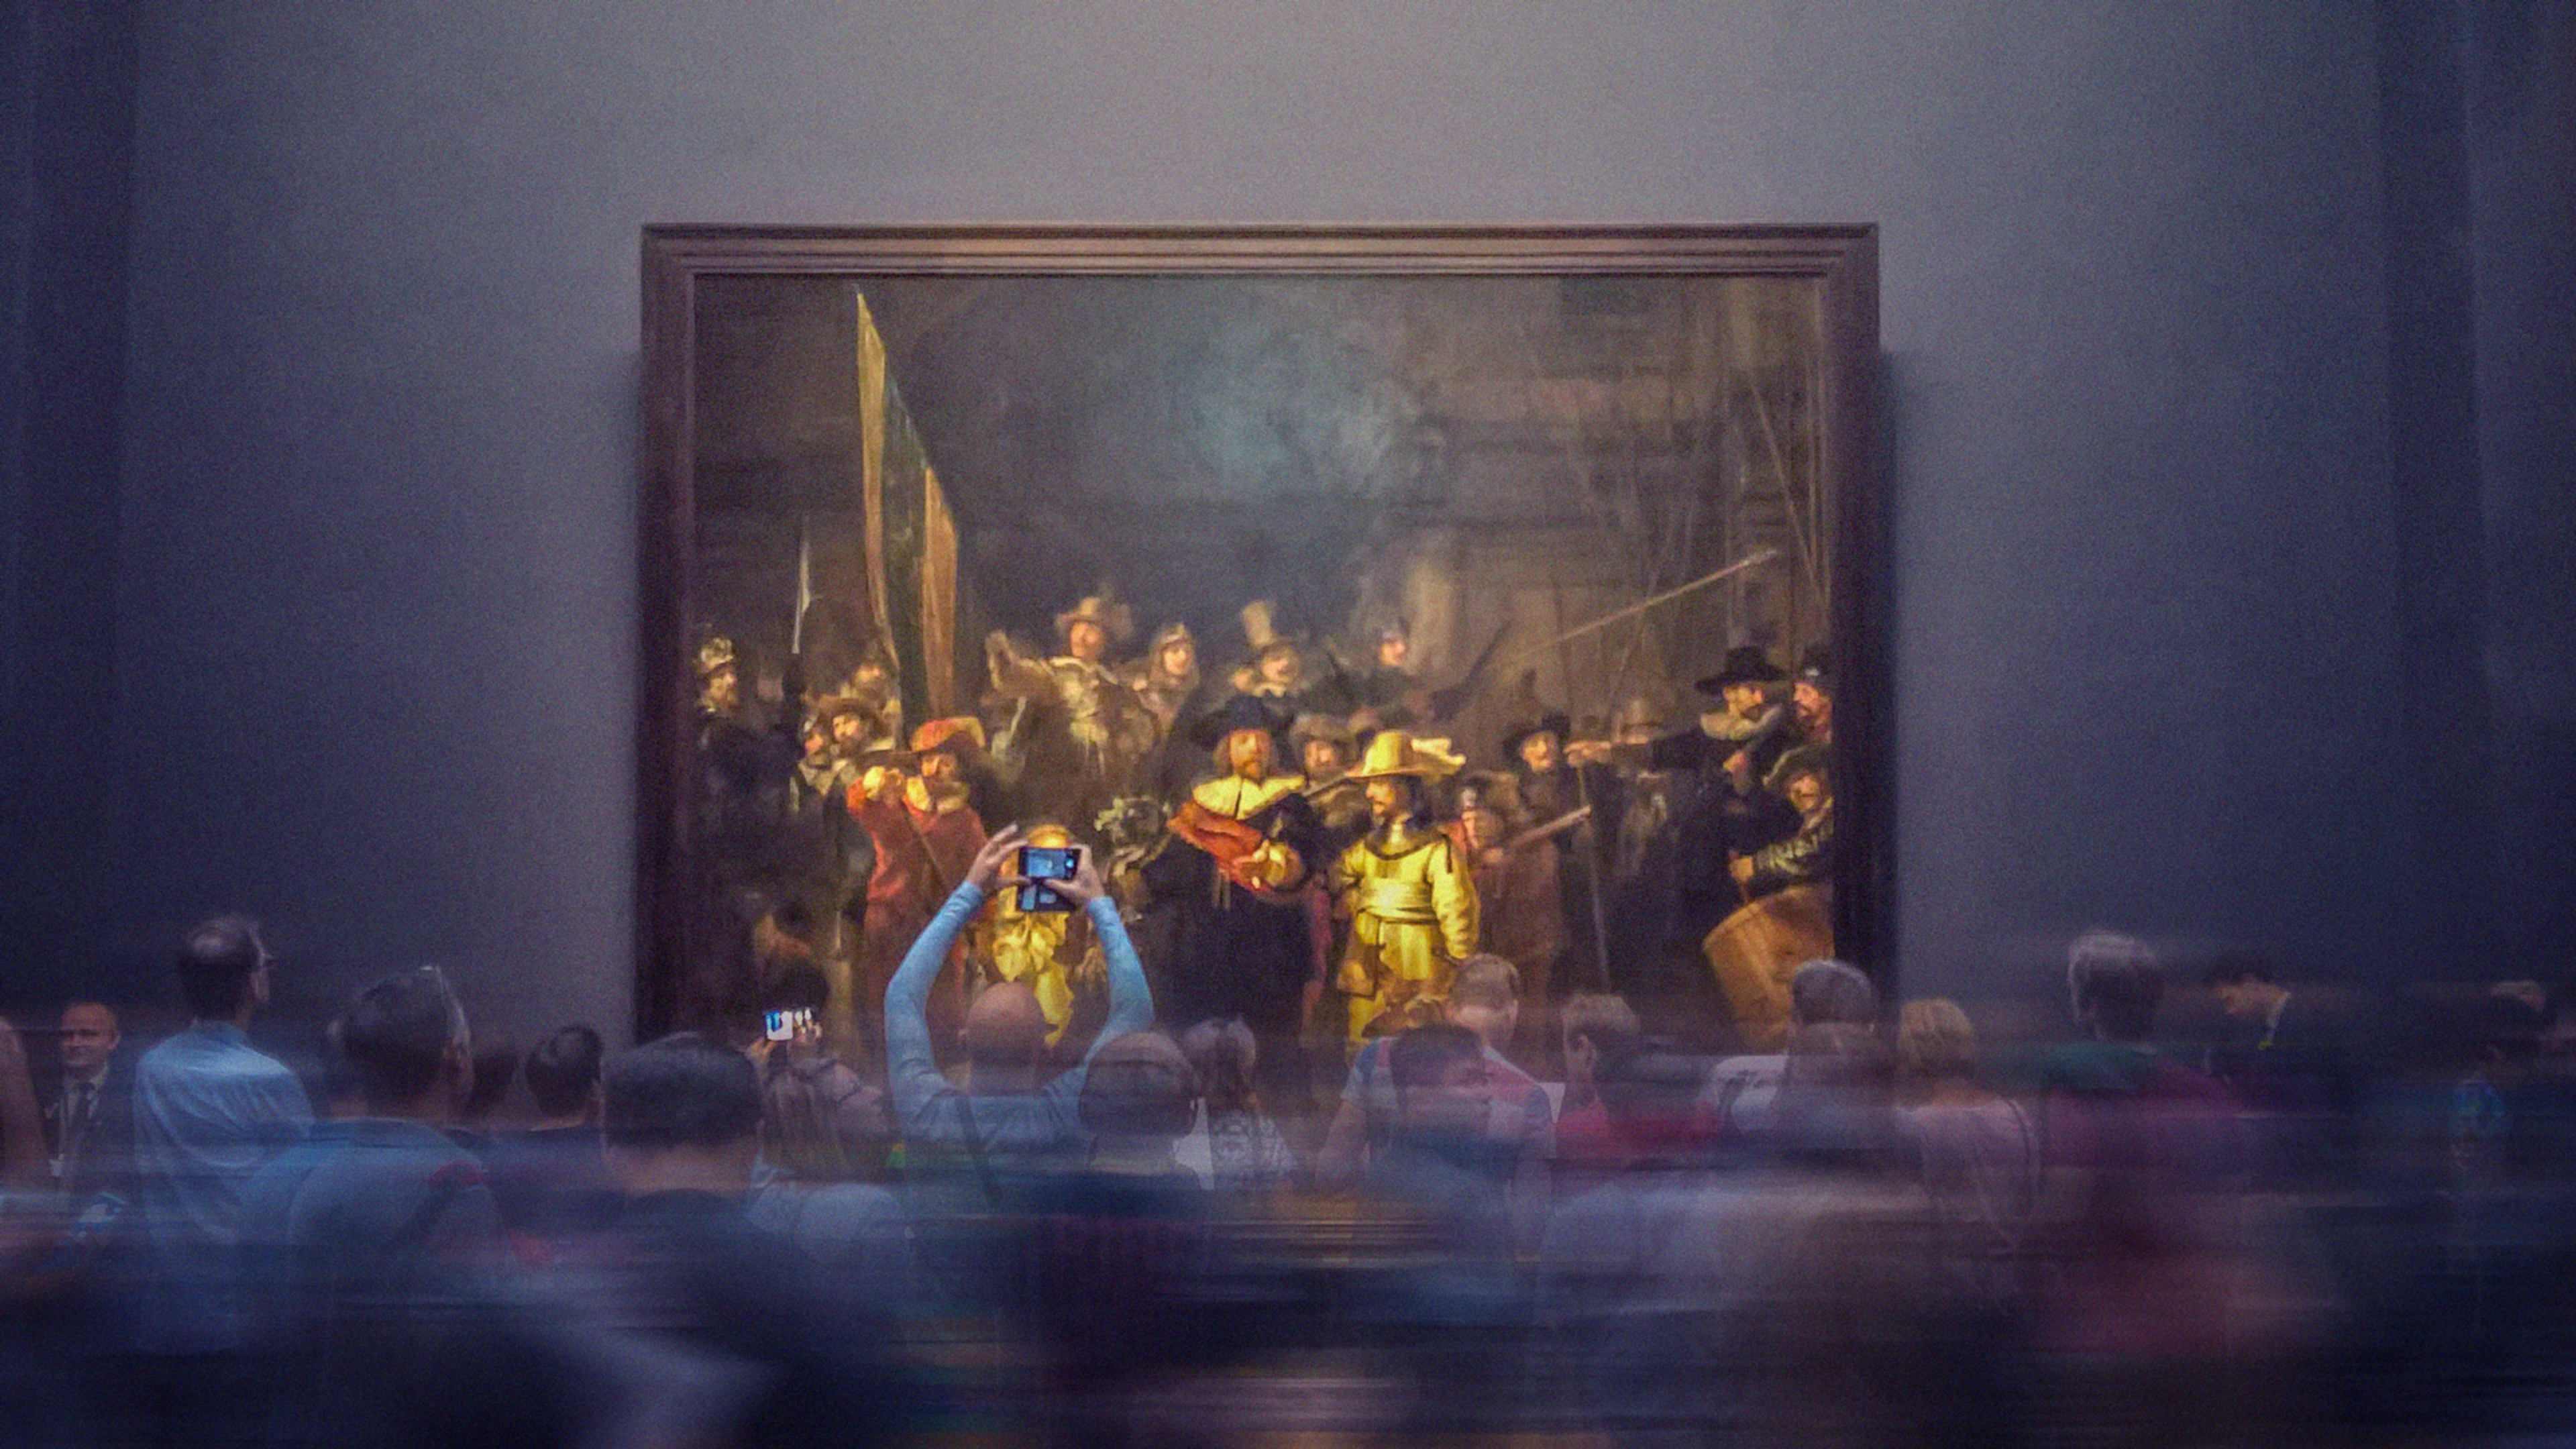 Basically, stop complaining about smartphones at museums